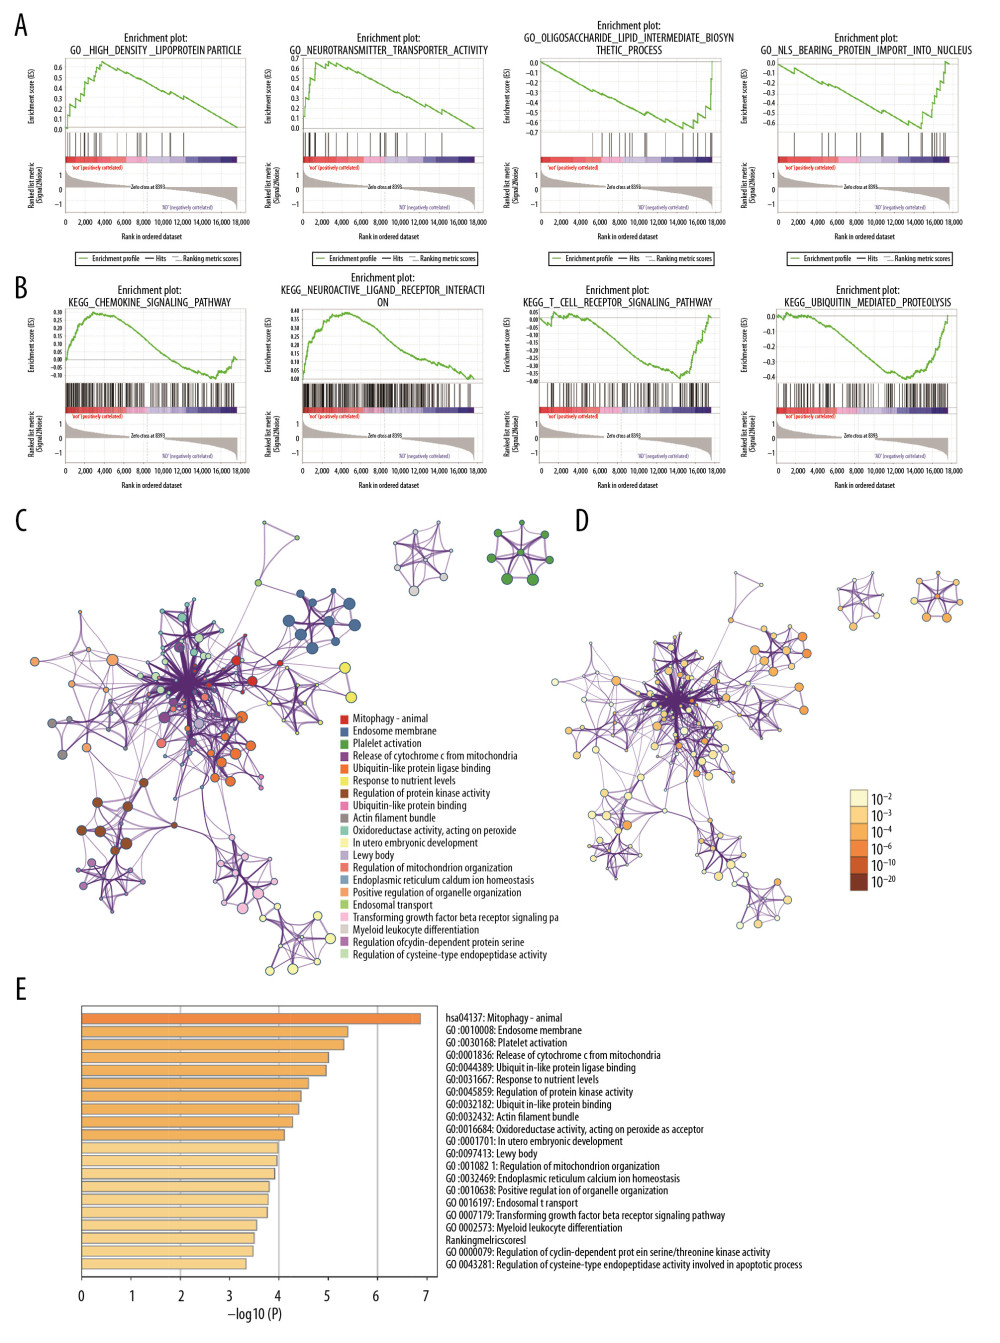 Gene functional enrichment analysis of the MEyellow model DEGs based on GSEA and Metascape. (A) GSEA-based GO analyses. (B) GSEA-based KEGG analyses. (C) Enrichment GO-KEGG color by cluster analyses using Metascape. (D) Enrichment GO-KEGG Color by P-value analyses using Metascape. (E) Enrichment heatmap selected GO-KEGG analyses using Metascape. DEGs – differently expressed genes; GSEA – Gene Set Enrichment Analysis; GO – Gene Ontology; KEGG – Kyoto Encyclopedia of Genes and Genomes.